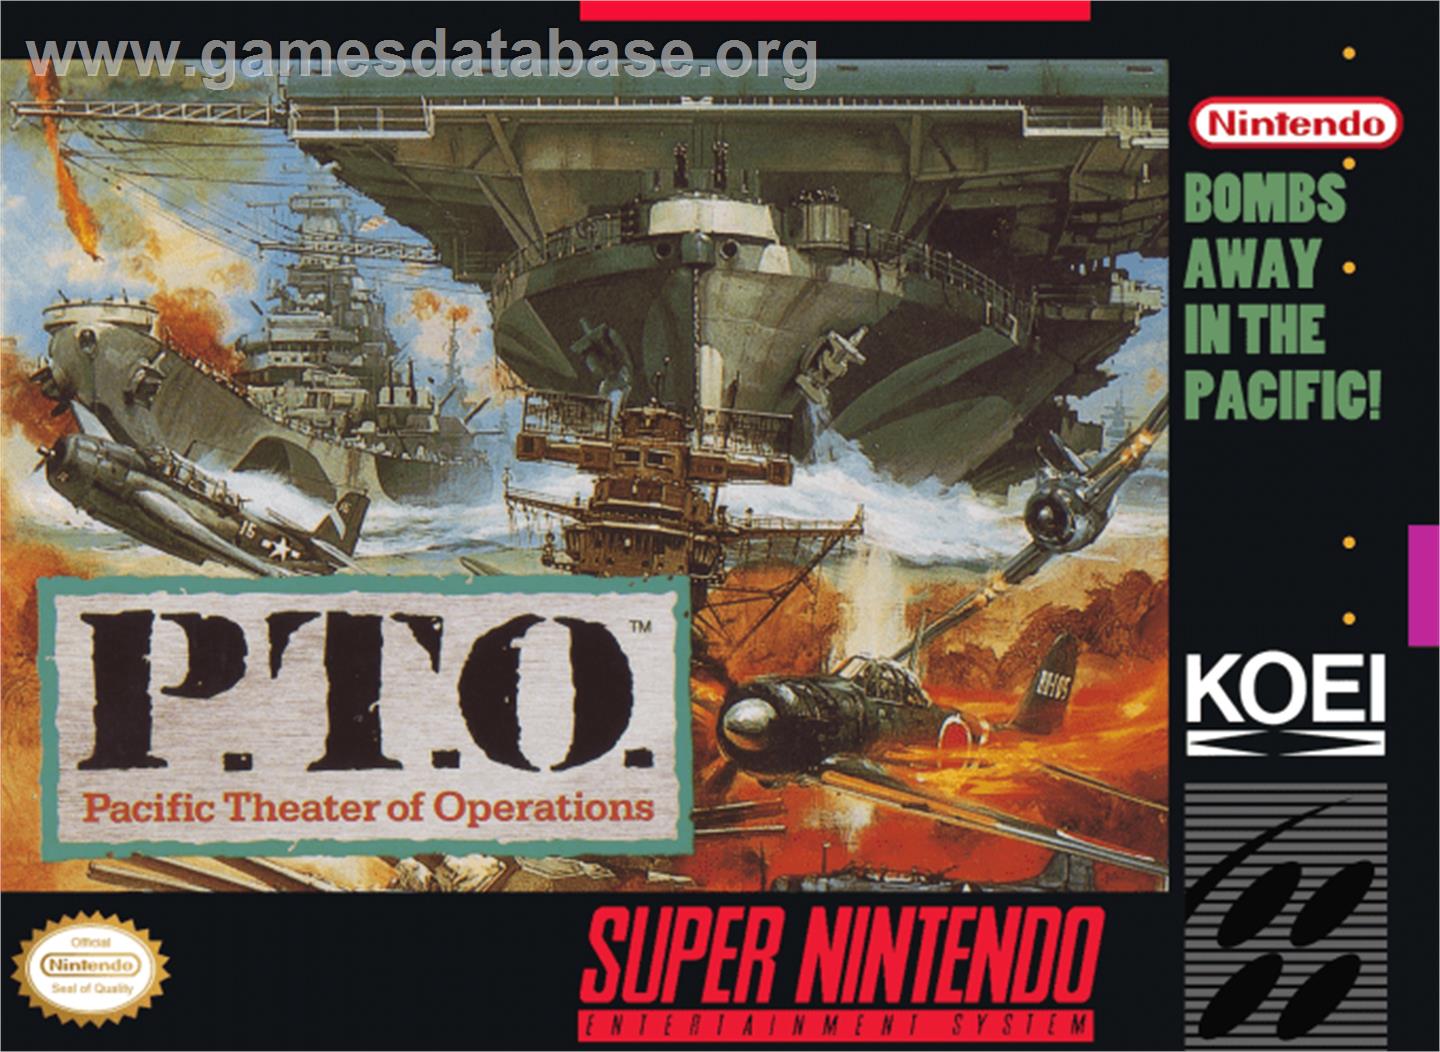 P.T.O.: Pacific Theater of Operations - Nintendo SNES - Artwork - Box